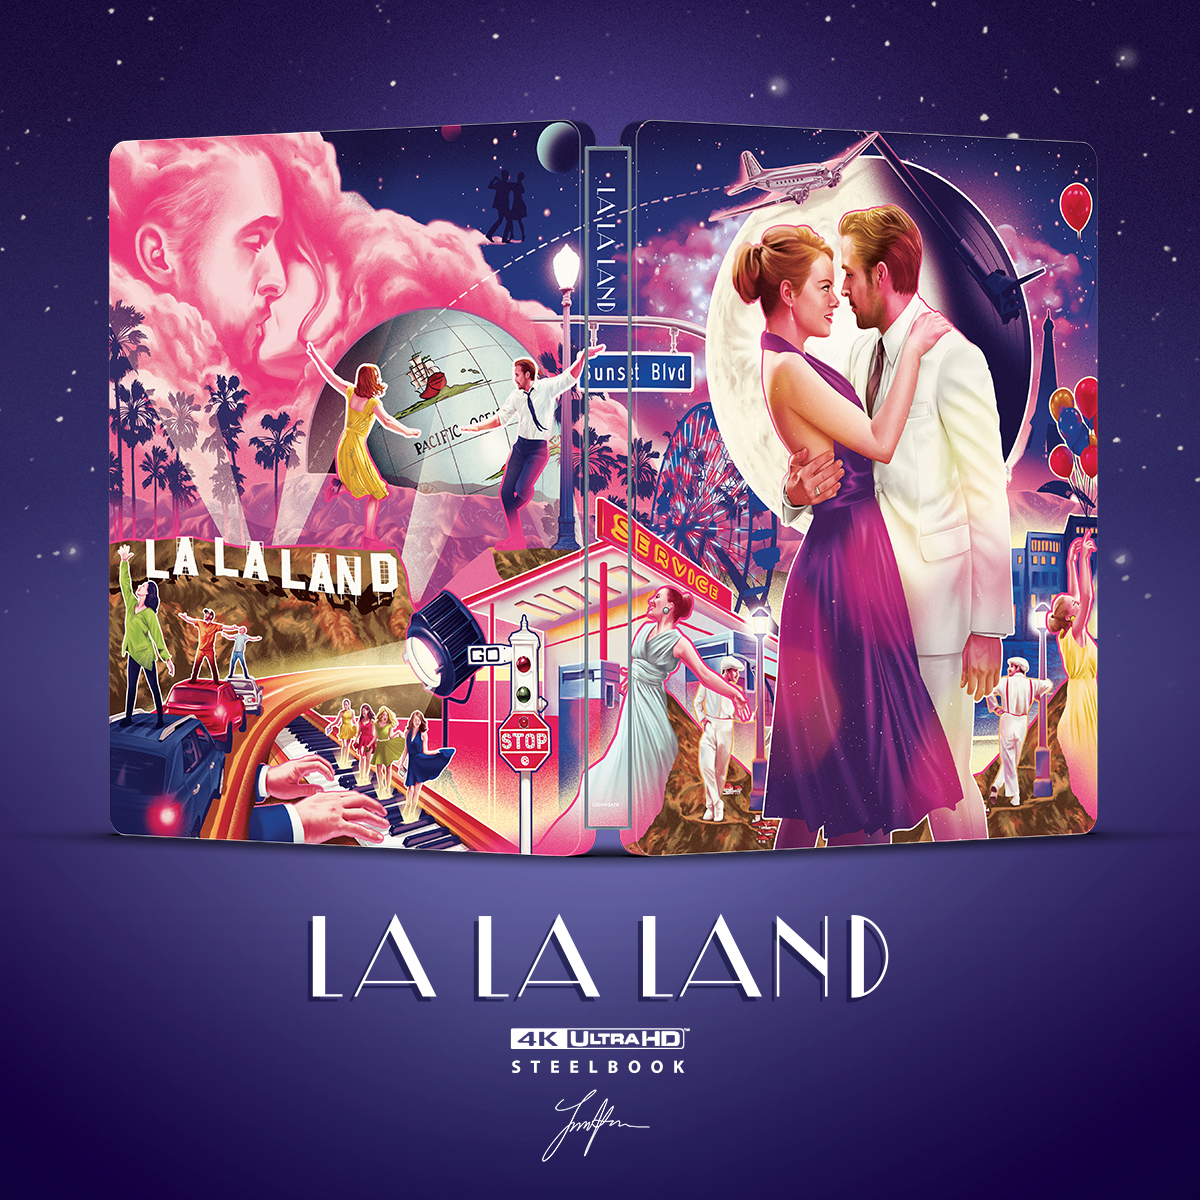 La La Land on X: Here's to the ones who dream of this beautiful La La Land  SteelBook art. Available in 4K + Blu-ray + Digital, exclusively at Best Buy  on February